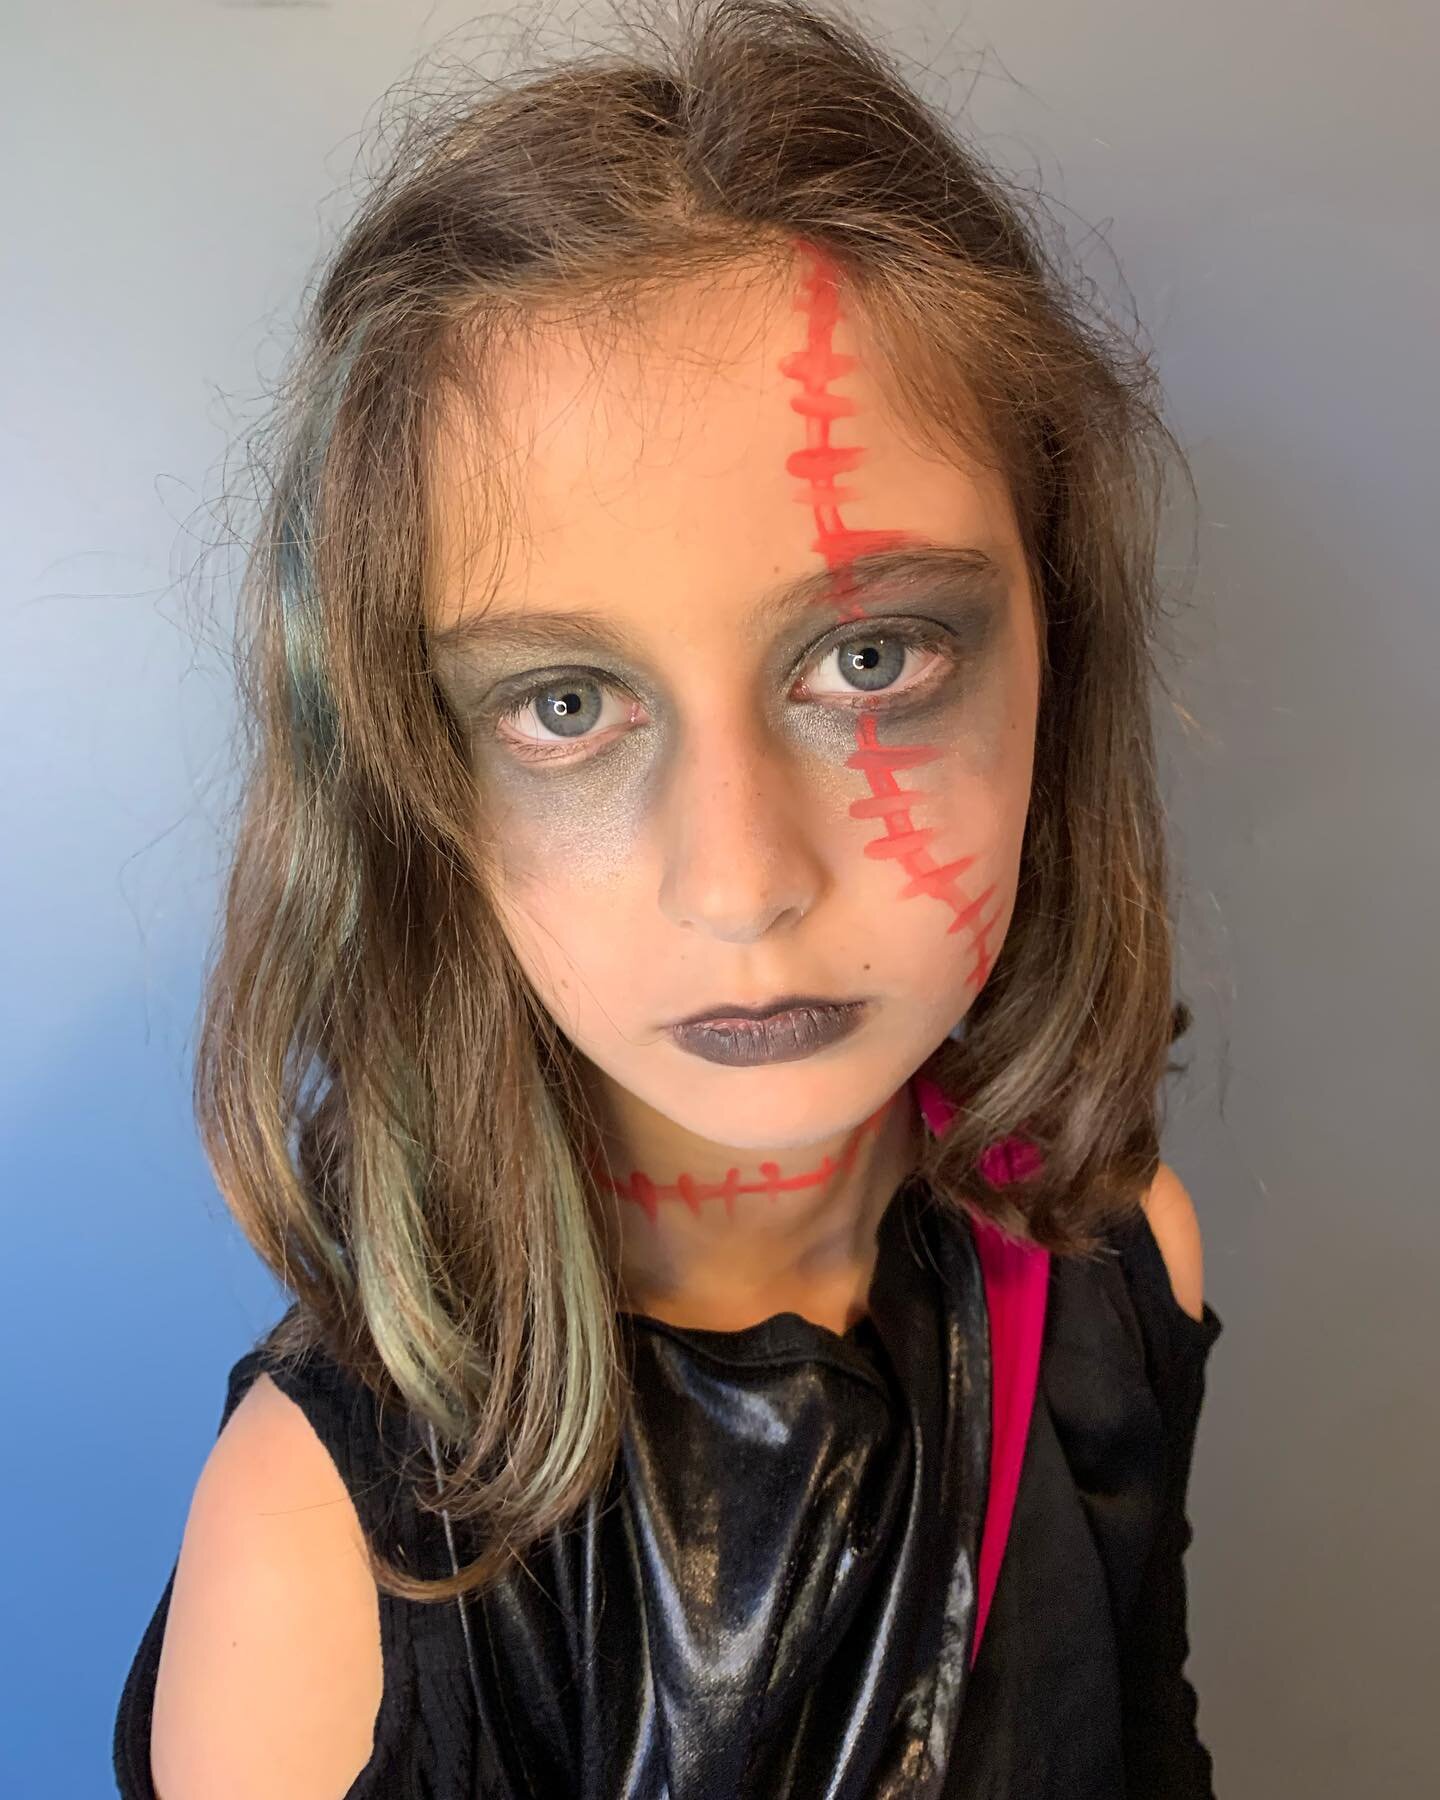 No spooky makeup ingredients for my zombie warrior.  We all deserve safe/transparent products - whether it&rsquo;s October 31st or any day of the year. 

Her first few Halloween&rsquo;s I had no idea what was lurking in her face paint (and soaps/loti